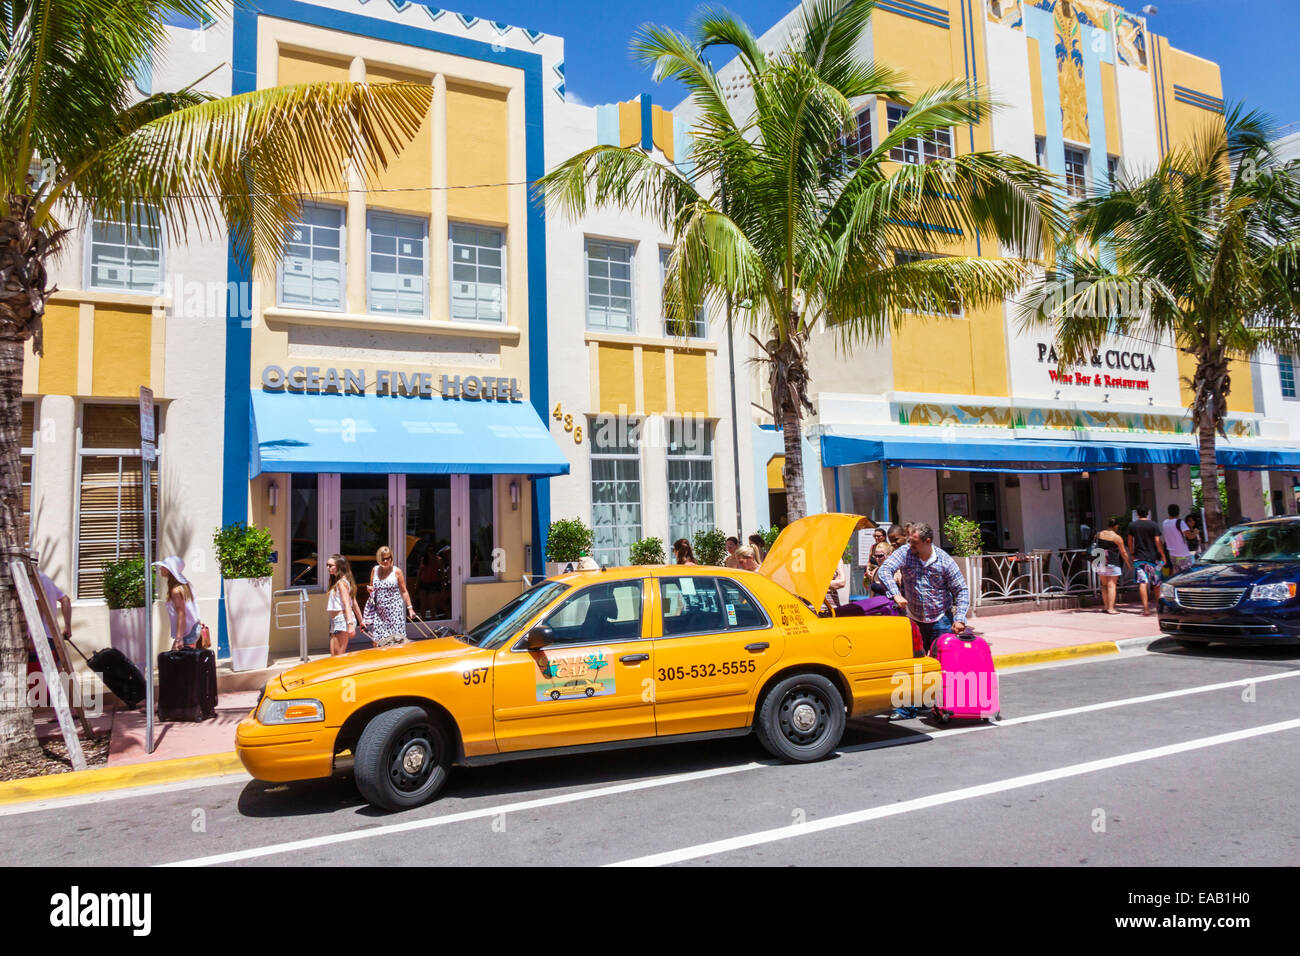 Miami Beach Florida,Ocean Drive,Ocean Five,hotel,hotel,hotels,taxi cab,yellow,driver,putting luggage in trunk,FL140823001 Stock Photo